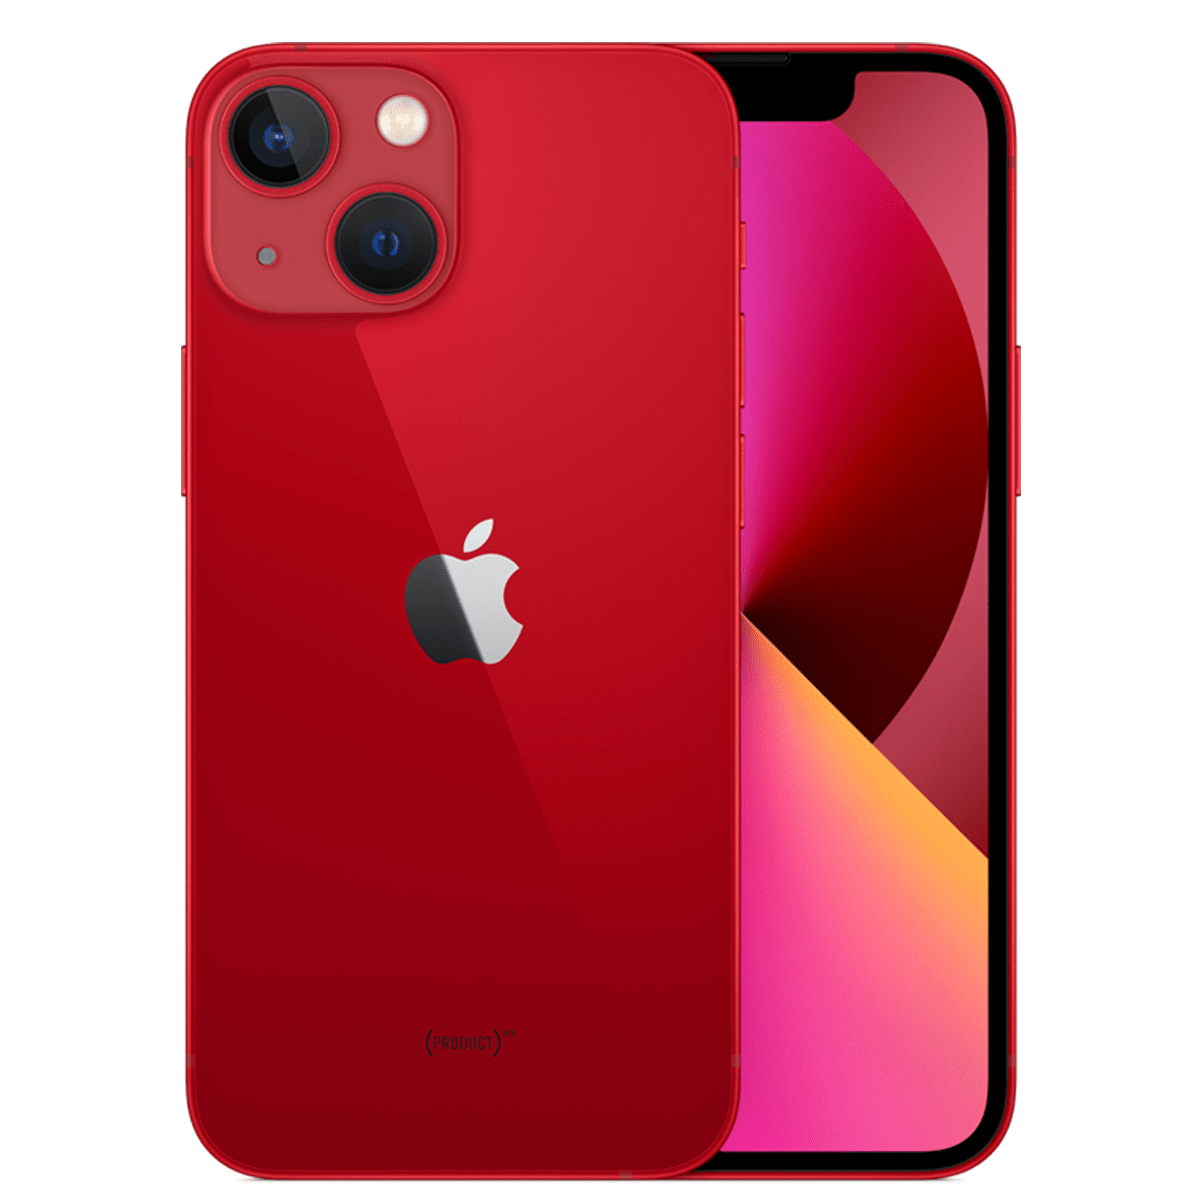 iphone 13 pro productred, iphone 13 png, iphone 13 png mockup, iphone 13 png black, iphone 13 png white, iphone 13 red 128gb, iphone 13 pro productred, iphone 13 png, iphone 13 png mockup, iphone 13 png black, iphone 13 png white, iphone 13 red 128gb, iphone 13 png transparent, iphone 13 red 256gb,